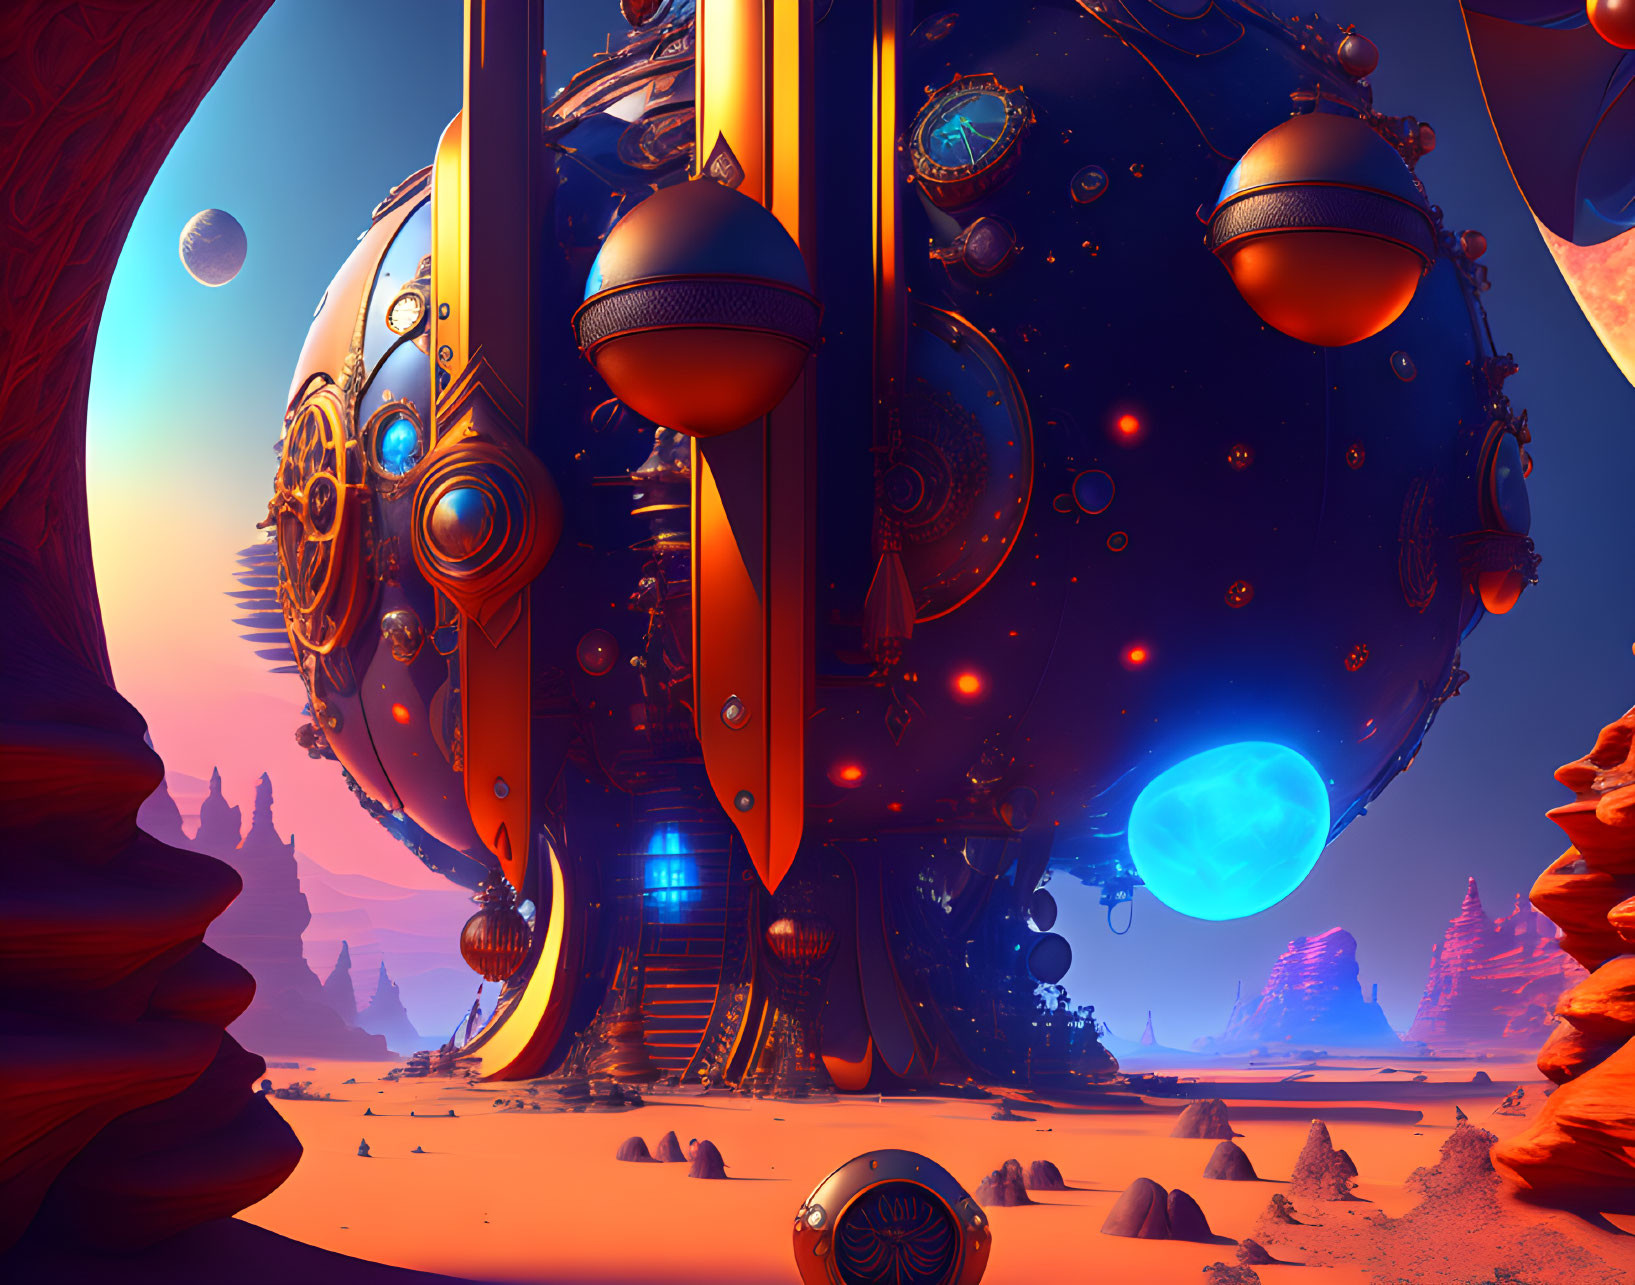 Alien landscape with floating orbs, intricate machinery, and red rocky terrain